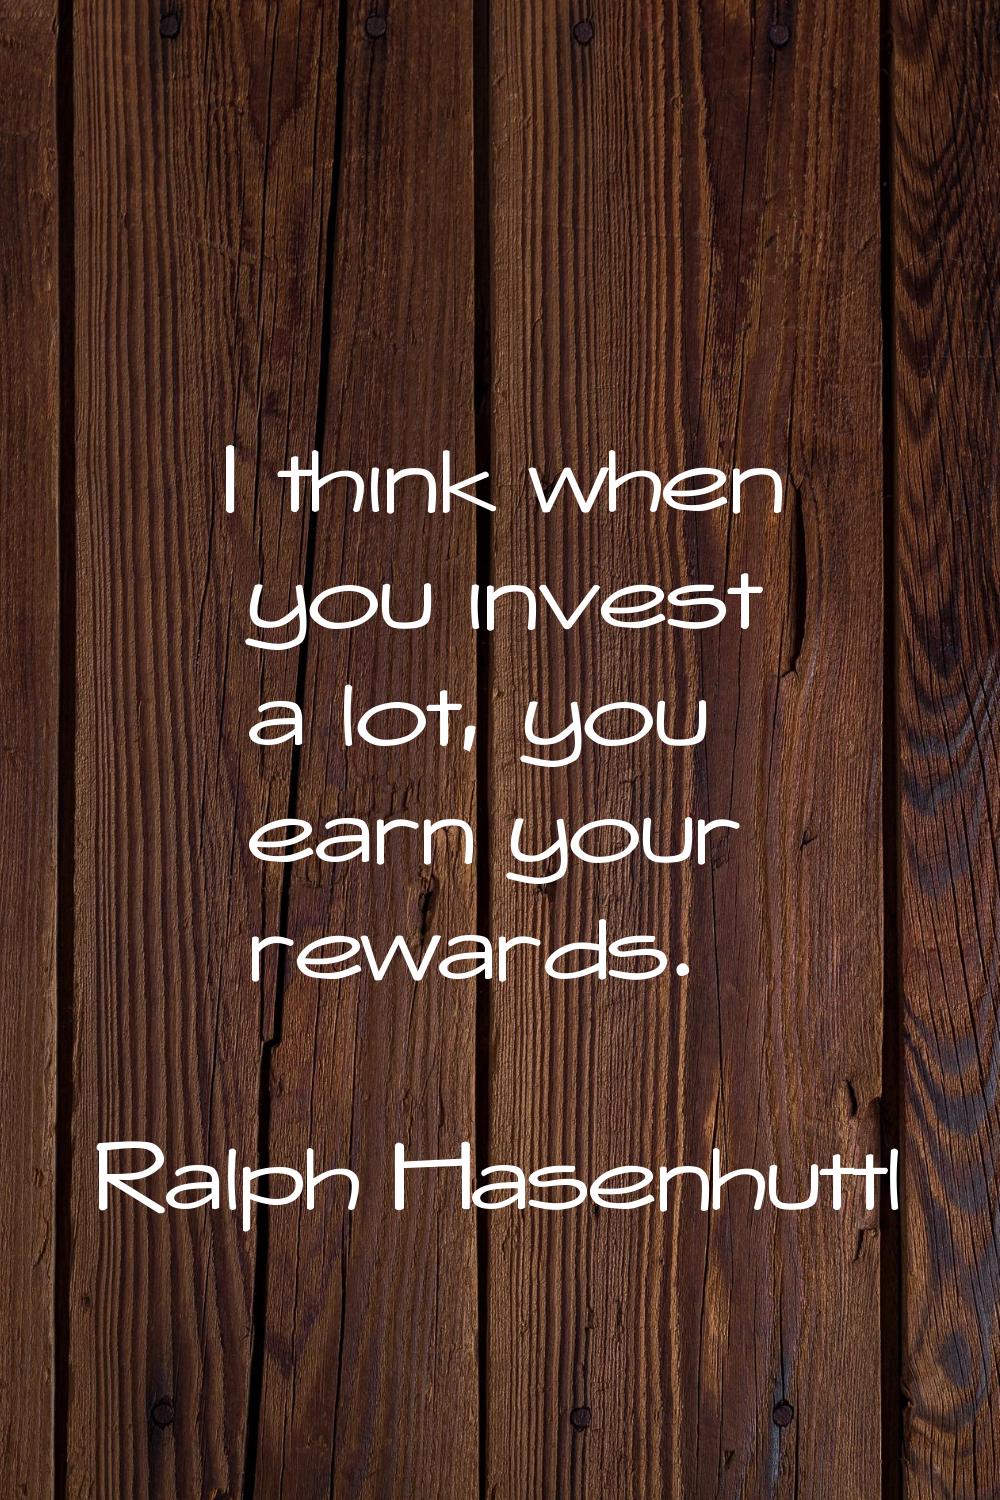 I think when you invest a lot, you earn your rewards.